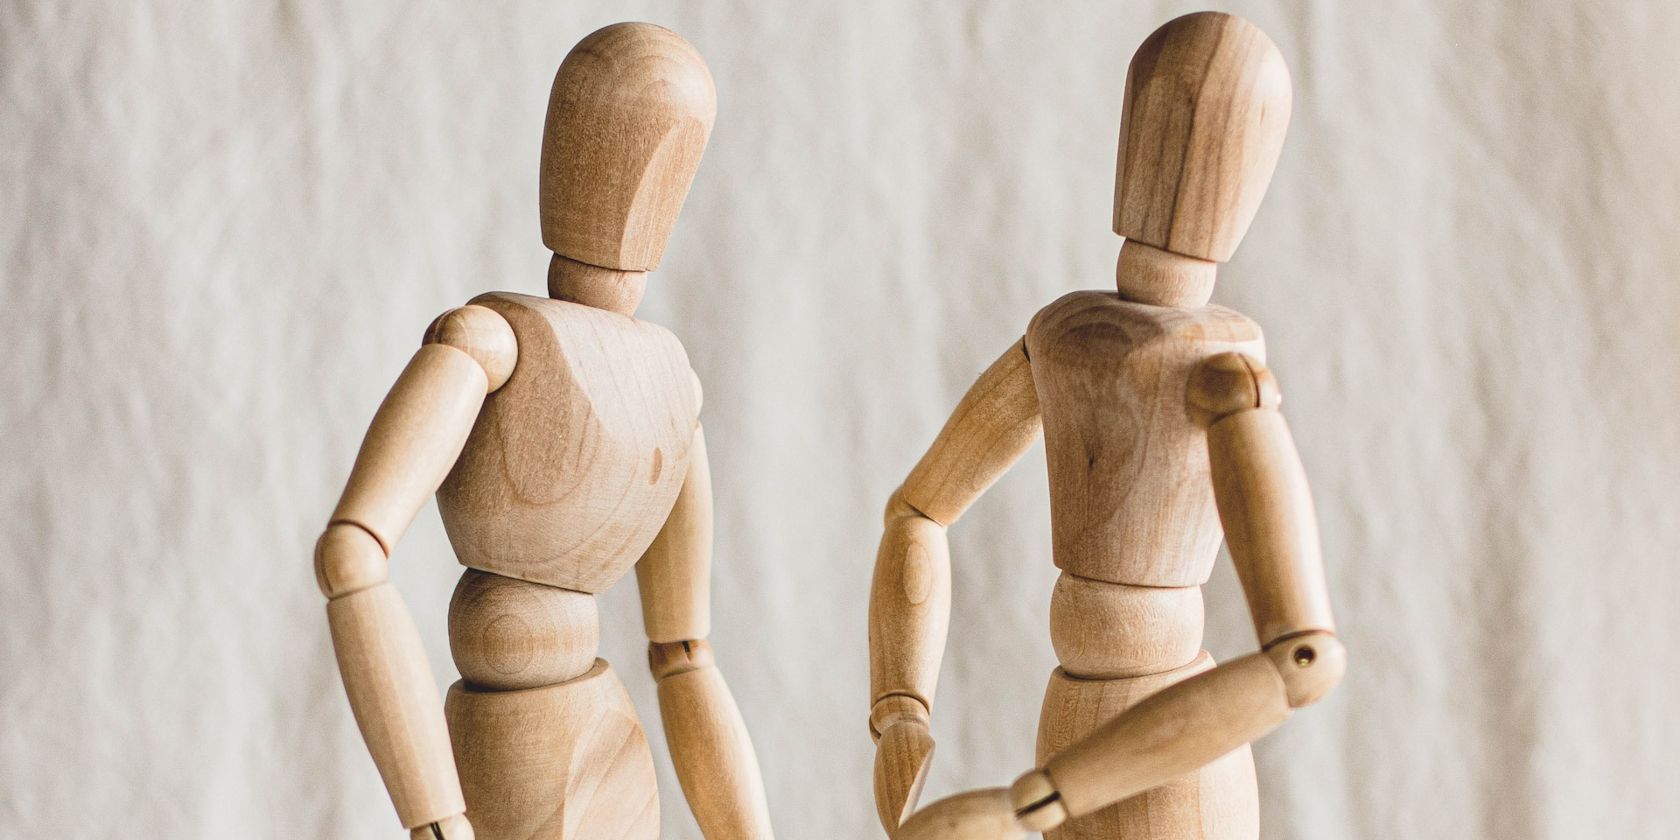 Two Wooden Figurines Set Up as Characters